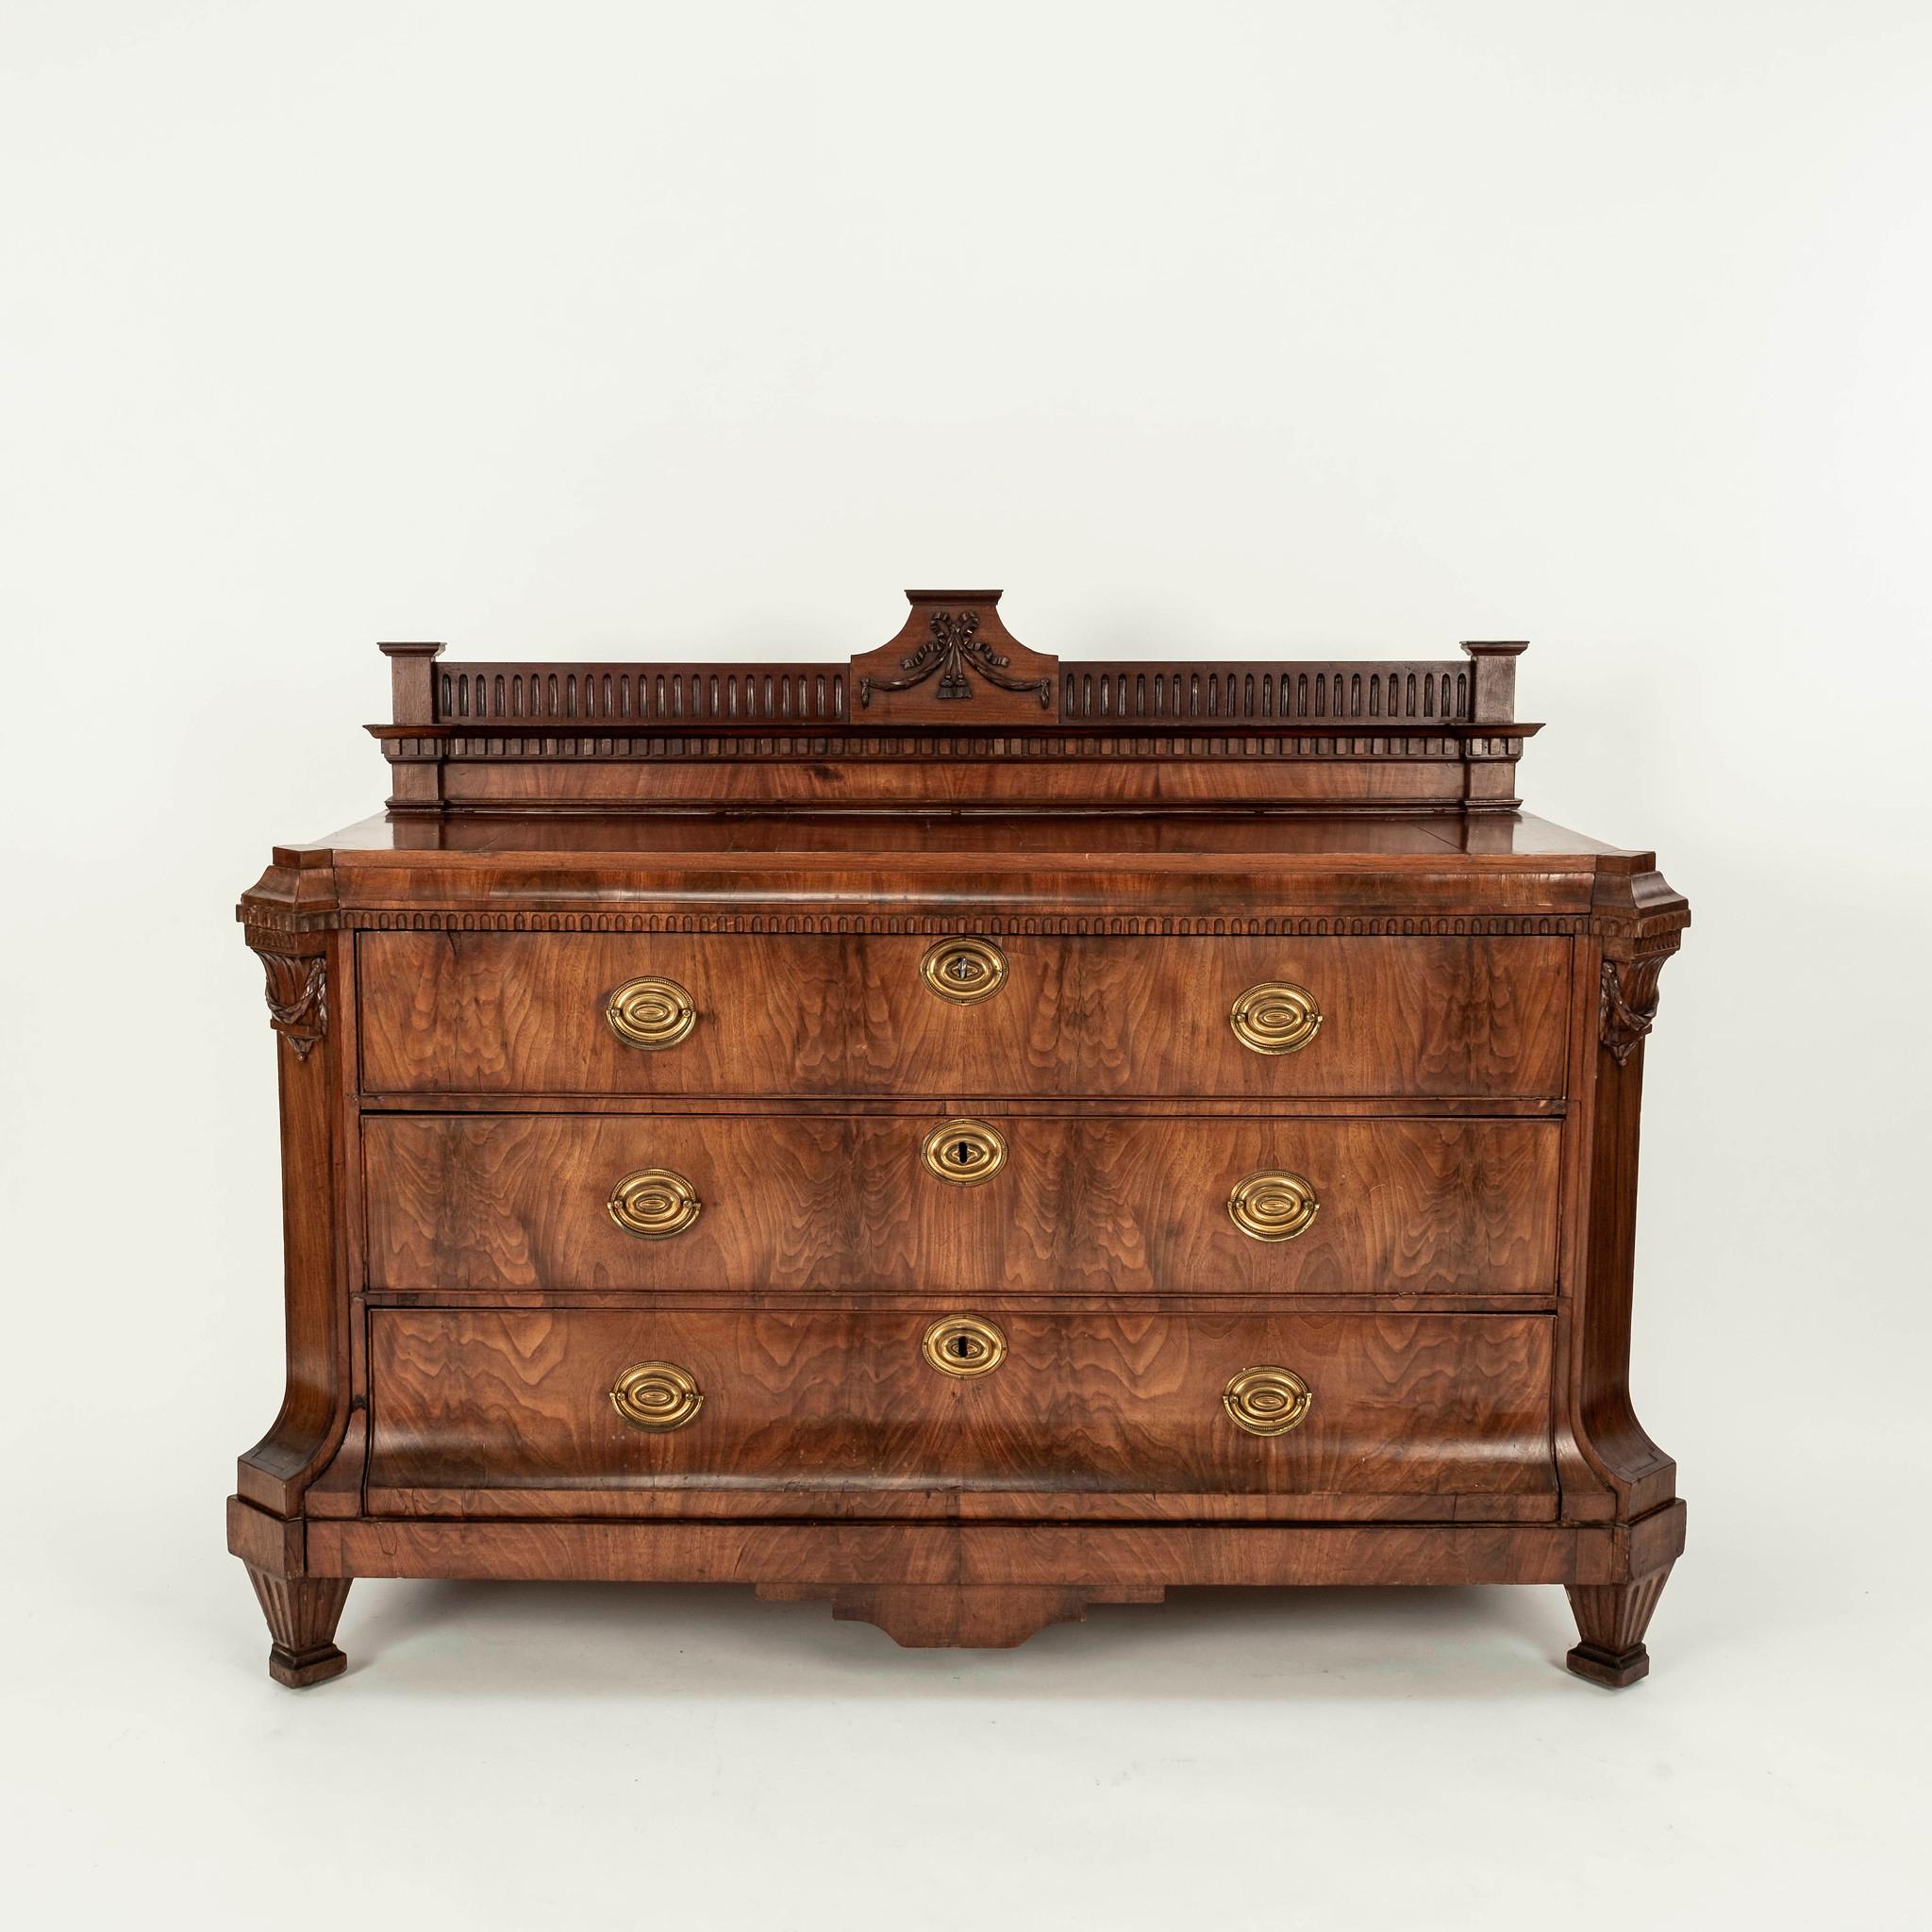 An early 19th Century Northern European neoclassical walnut commode with three drawers and brass pulls.